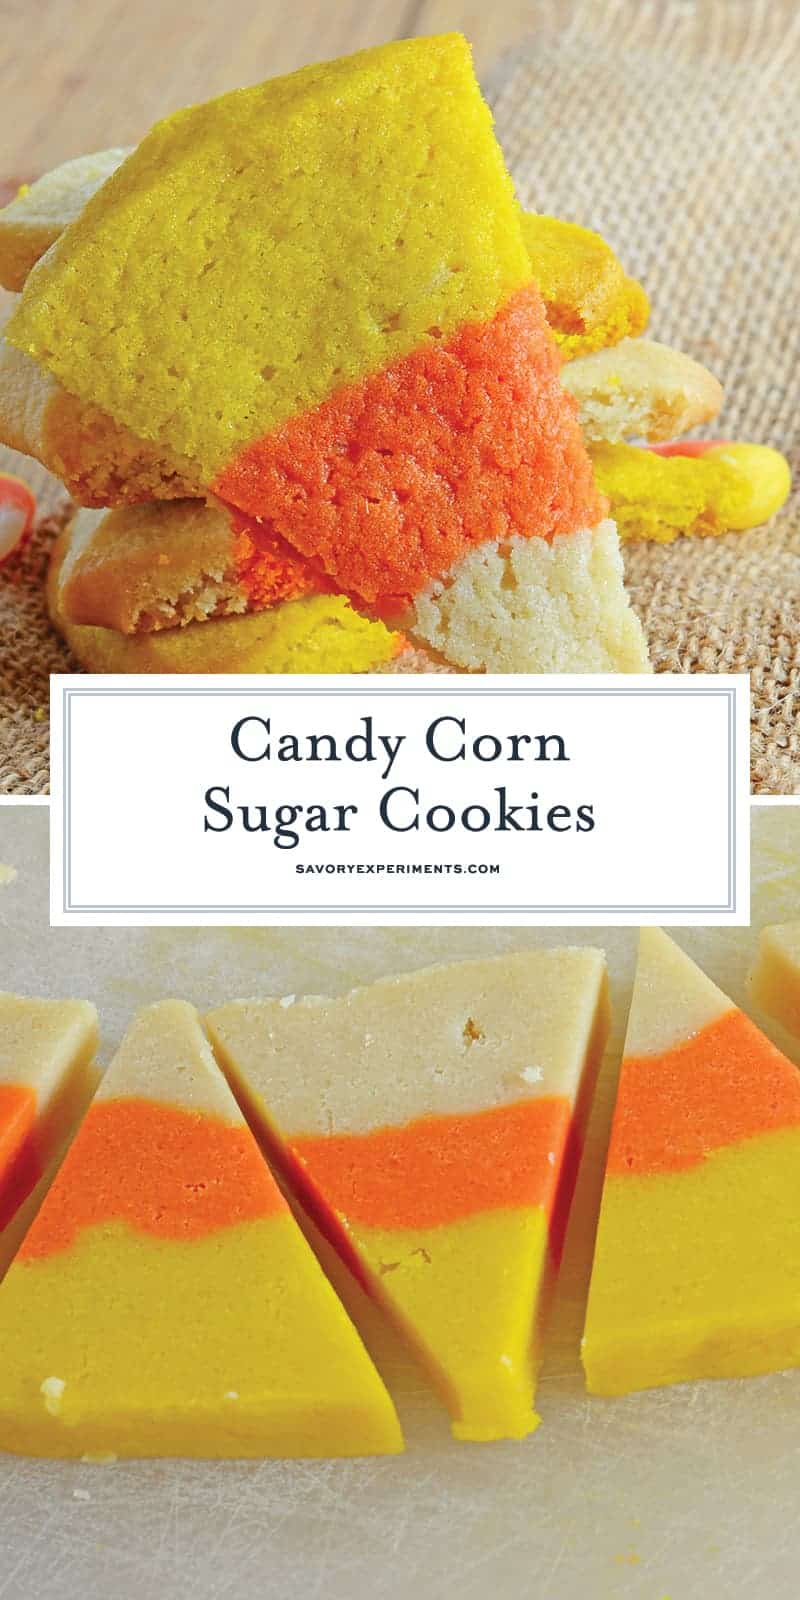 Candy Corn Sugar Cookies are the perfect Halloween Cookie! These festive and easy to make Halloween treats are perfect for any costume party! #halloweencookies #halloweendesserts #halloweensugarcookies www.savoryexperiments.com